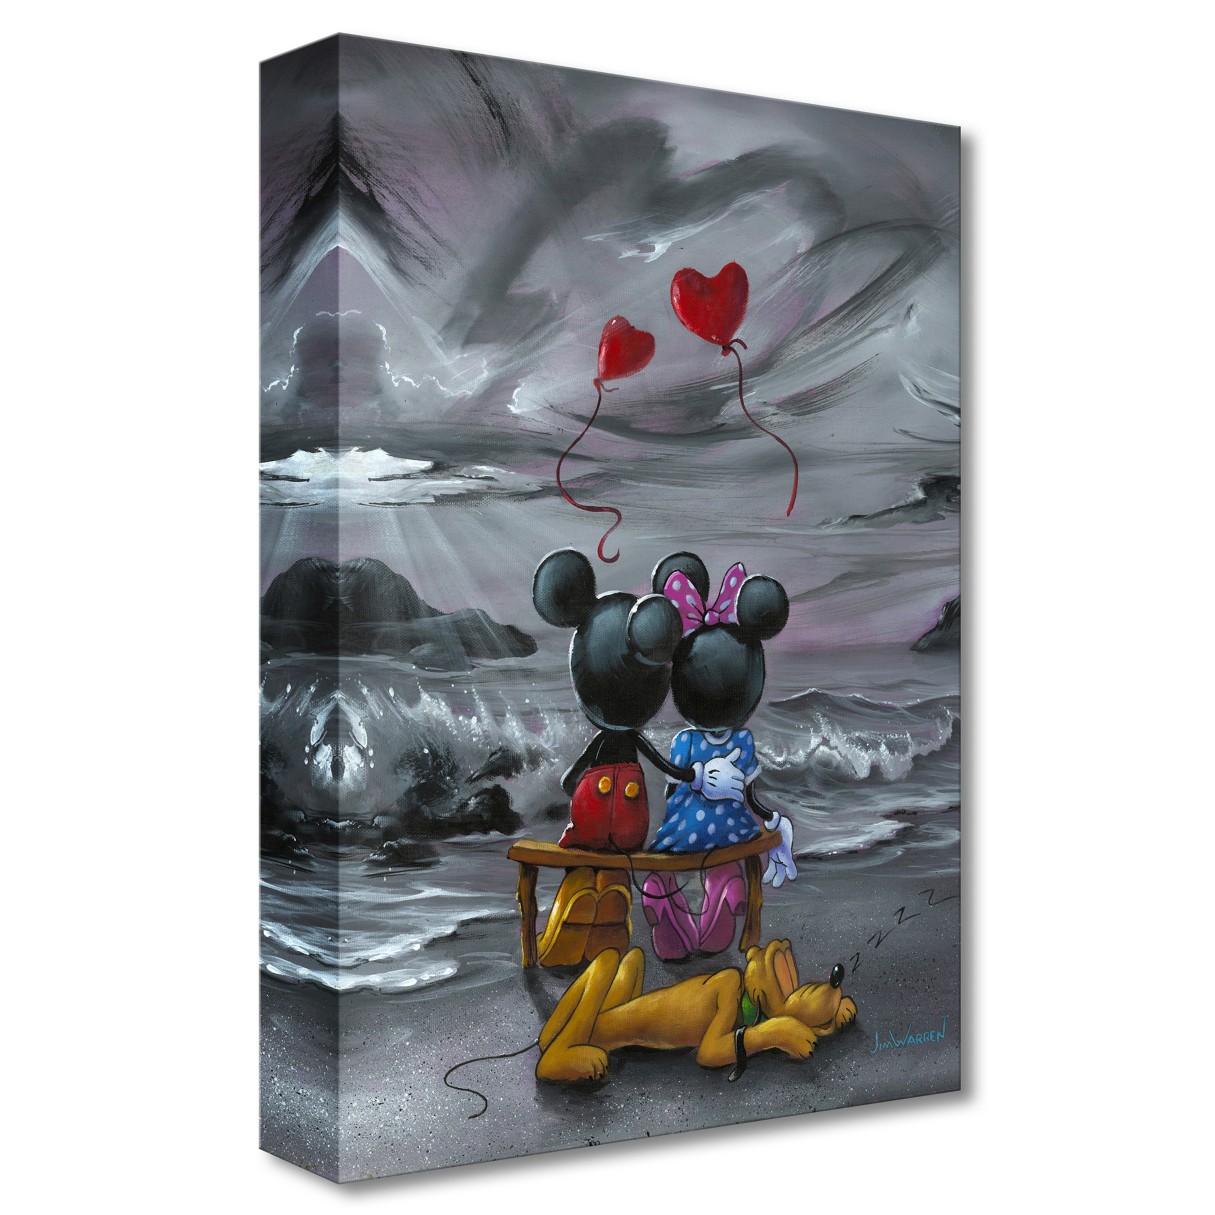 Mickey and Minnie Mouse ''Mickey and Minnie Forever Love'' Giclée on Canvas by Jim Warren – Limited Edition